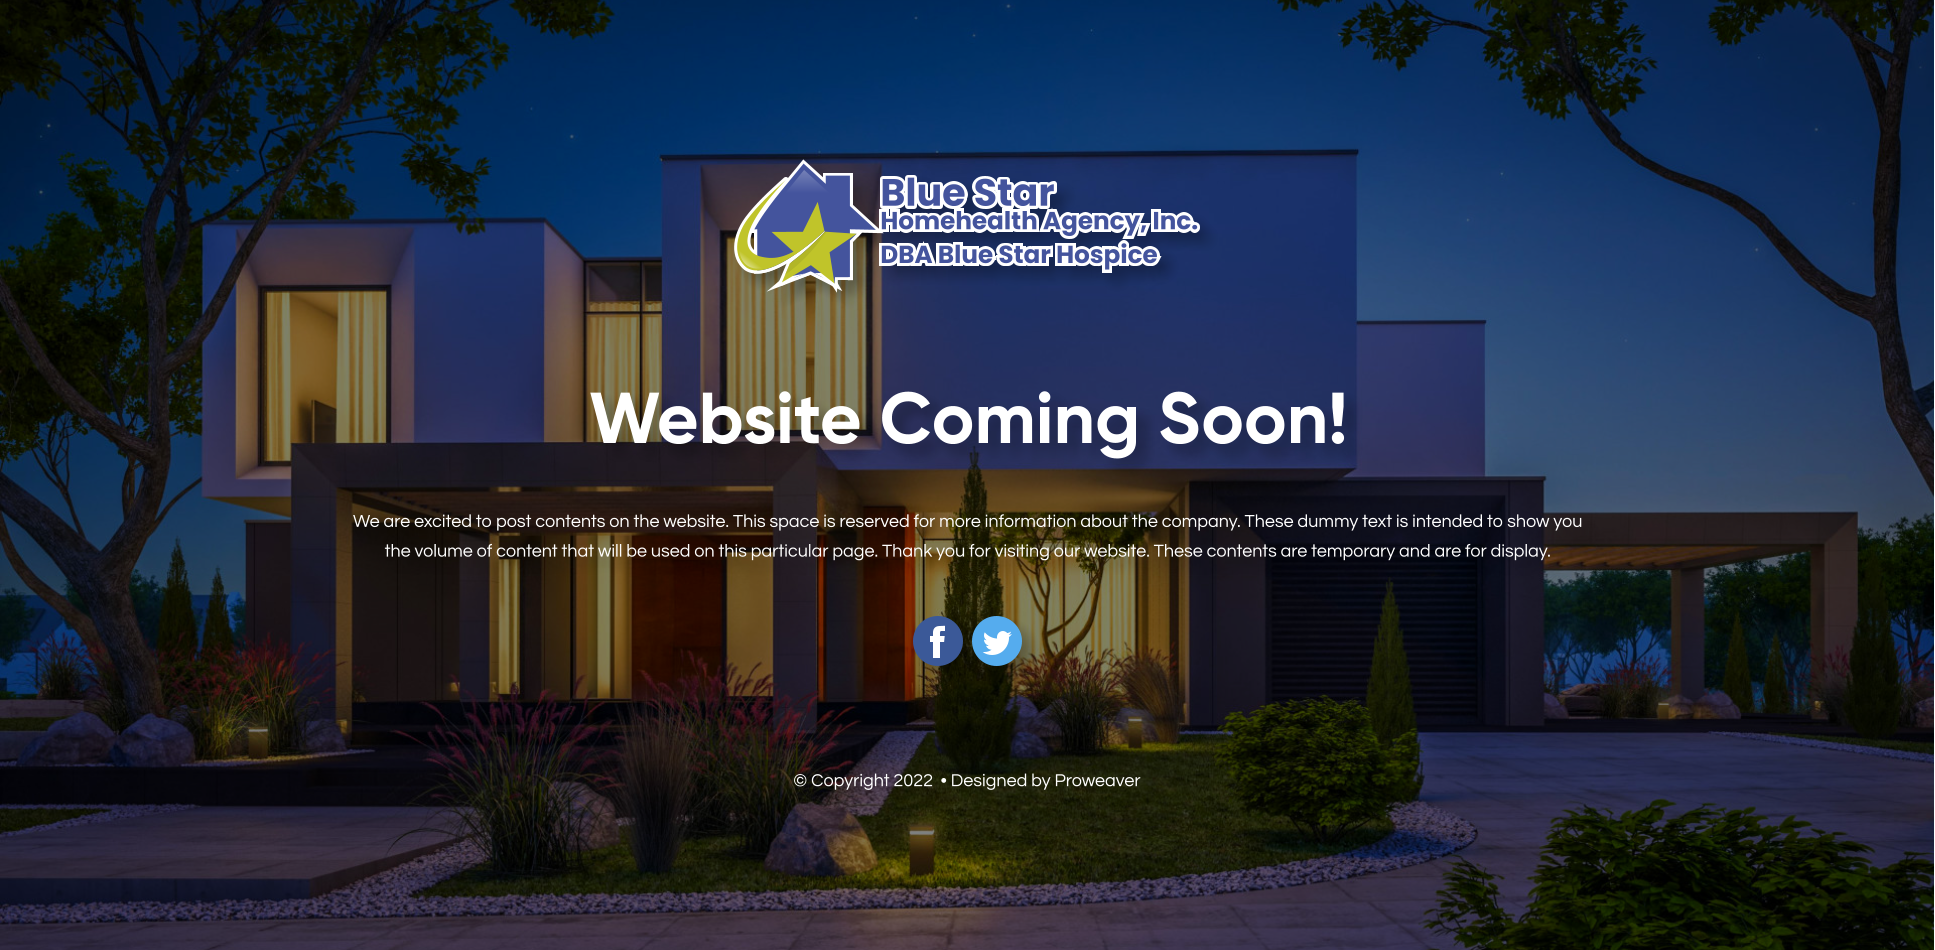 Website Coming Soon! We are excited to post contents on the website. This space is reserved for more information about the company. These dummy text is intended to show you the volume of content that will be used on this particular page. Thank you for visiting our website. These contents are temporary and are for display. © Copyright 2022  • Designed by Proweaver Blue Star Homehealth Agency, Inc. DBA Blue Star Hospice  Blue Star Homehealth Agency, Inc. DBA Blue Star Hospice